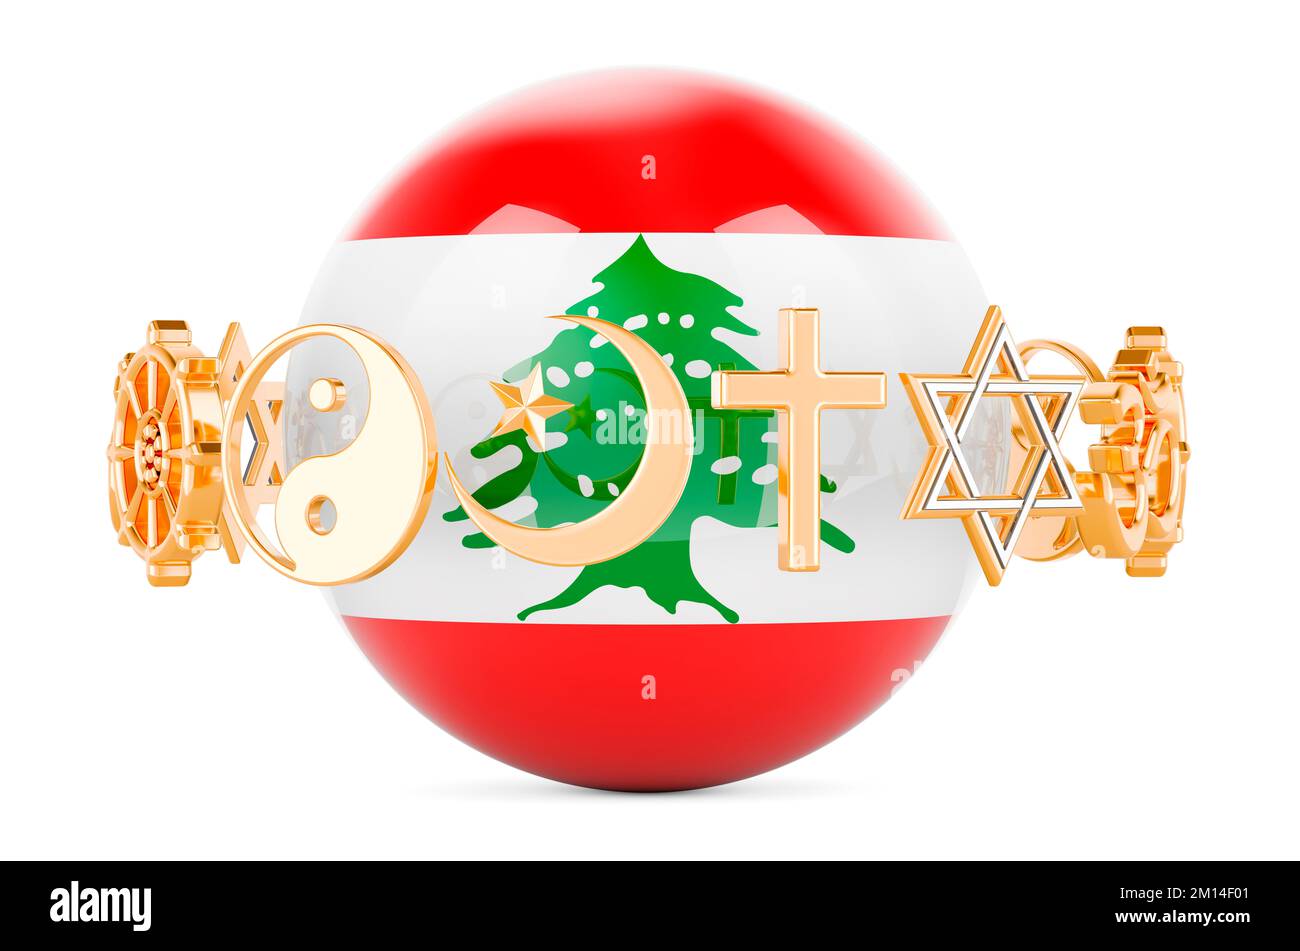 Lebanese flag painted on sphere with religions symbols around, 3D rendering isolated on white background Stock Photo